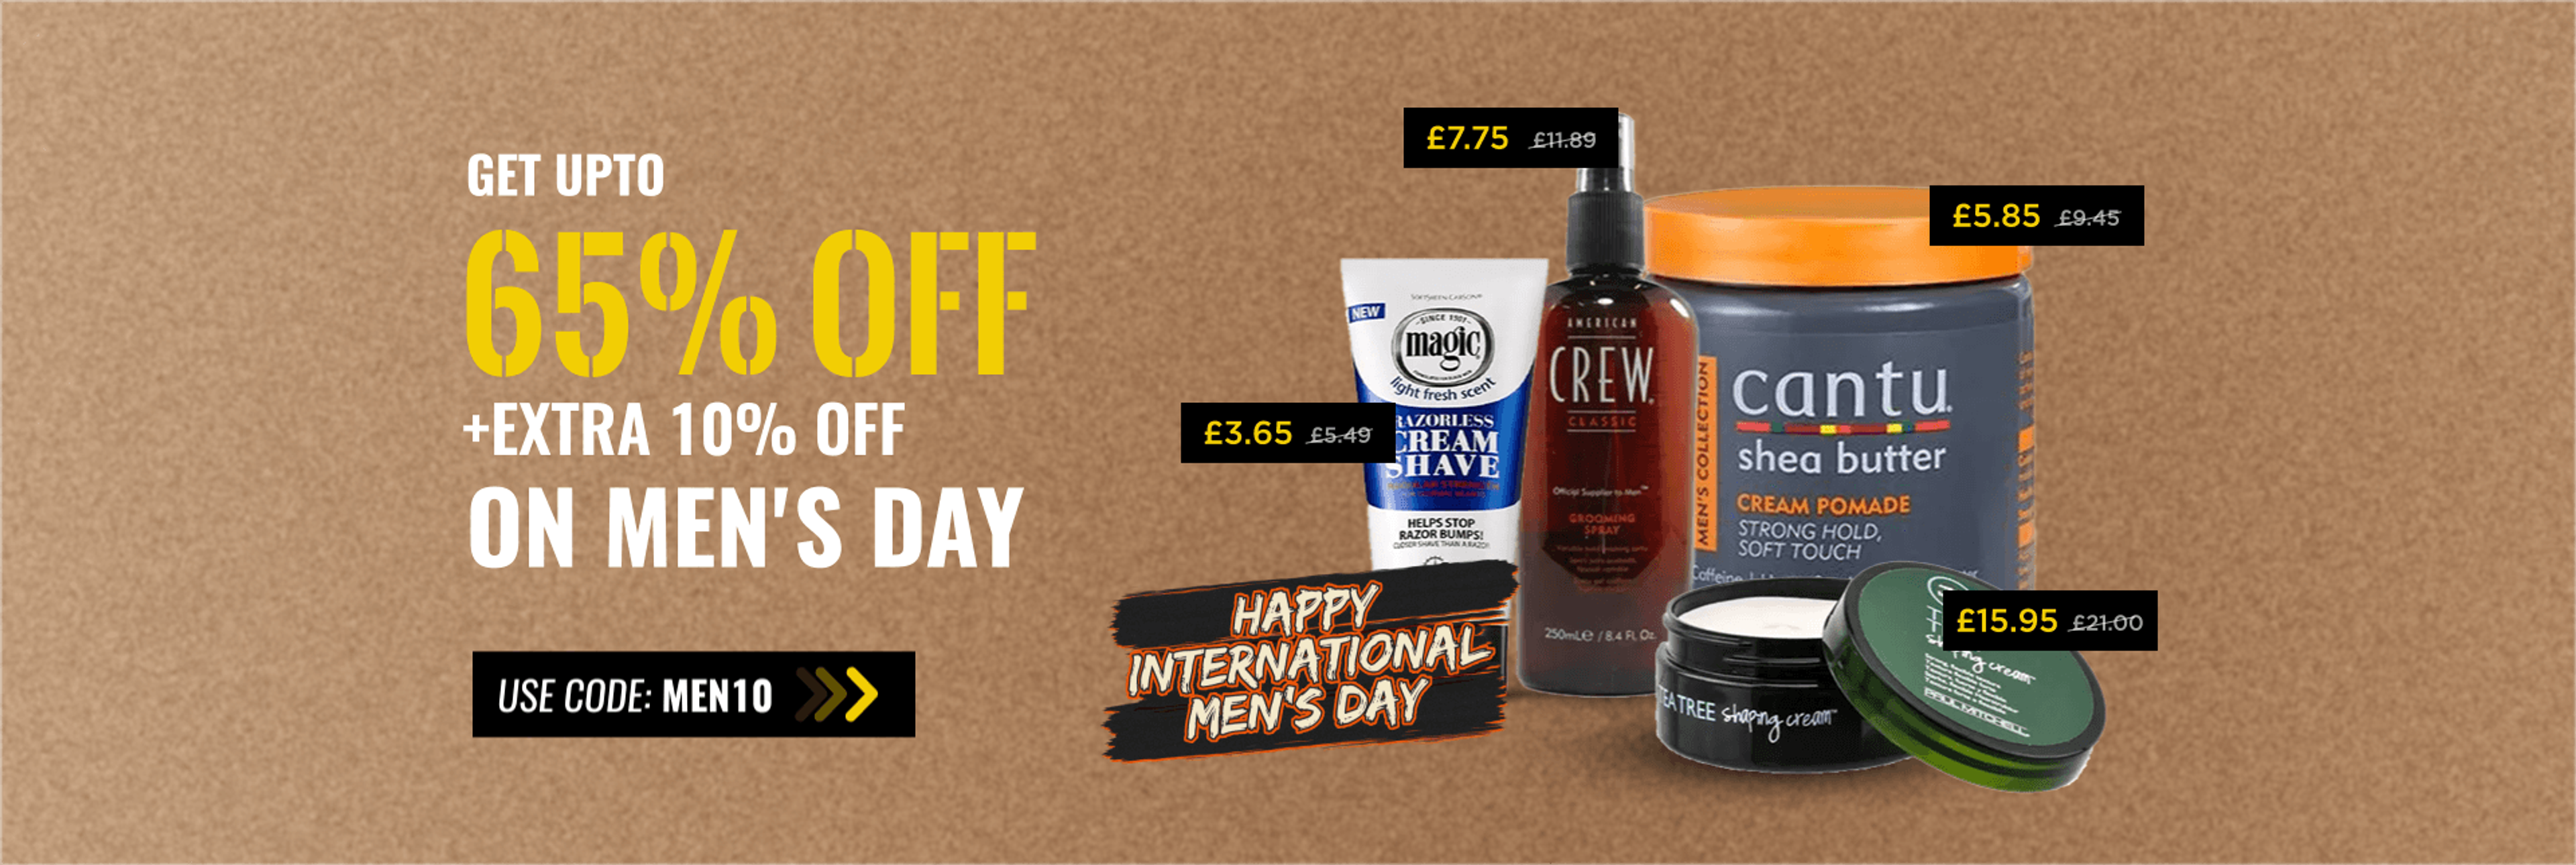 Get Up to 65% off on Men's Day + Extra 10% off by using code